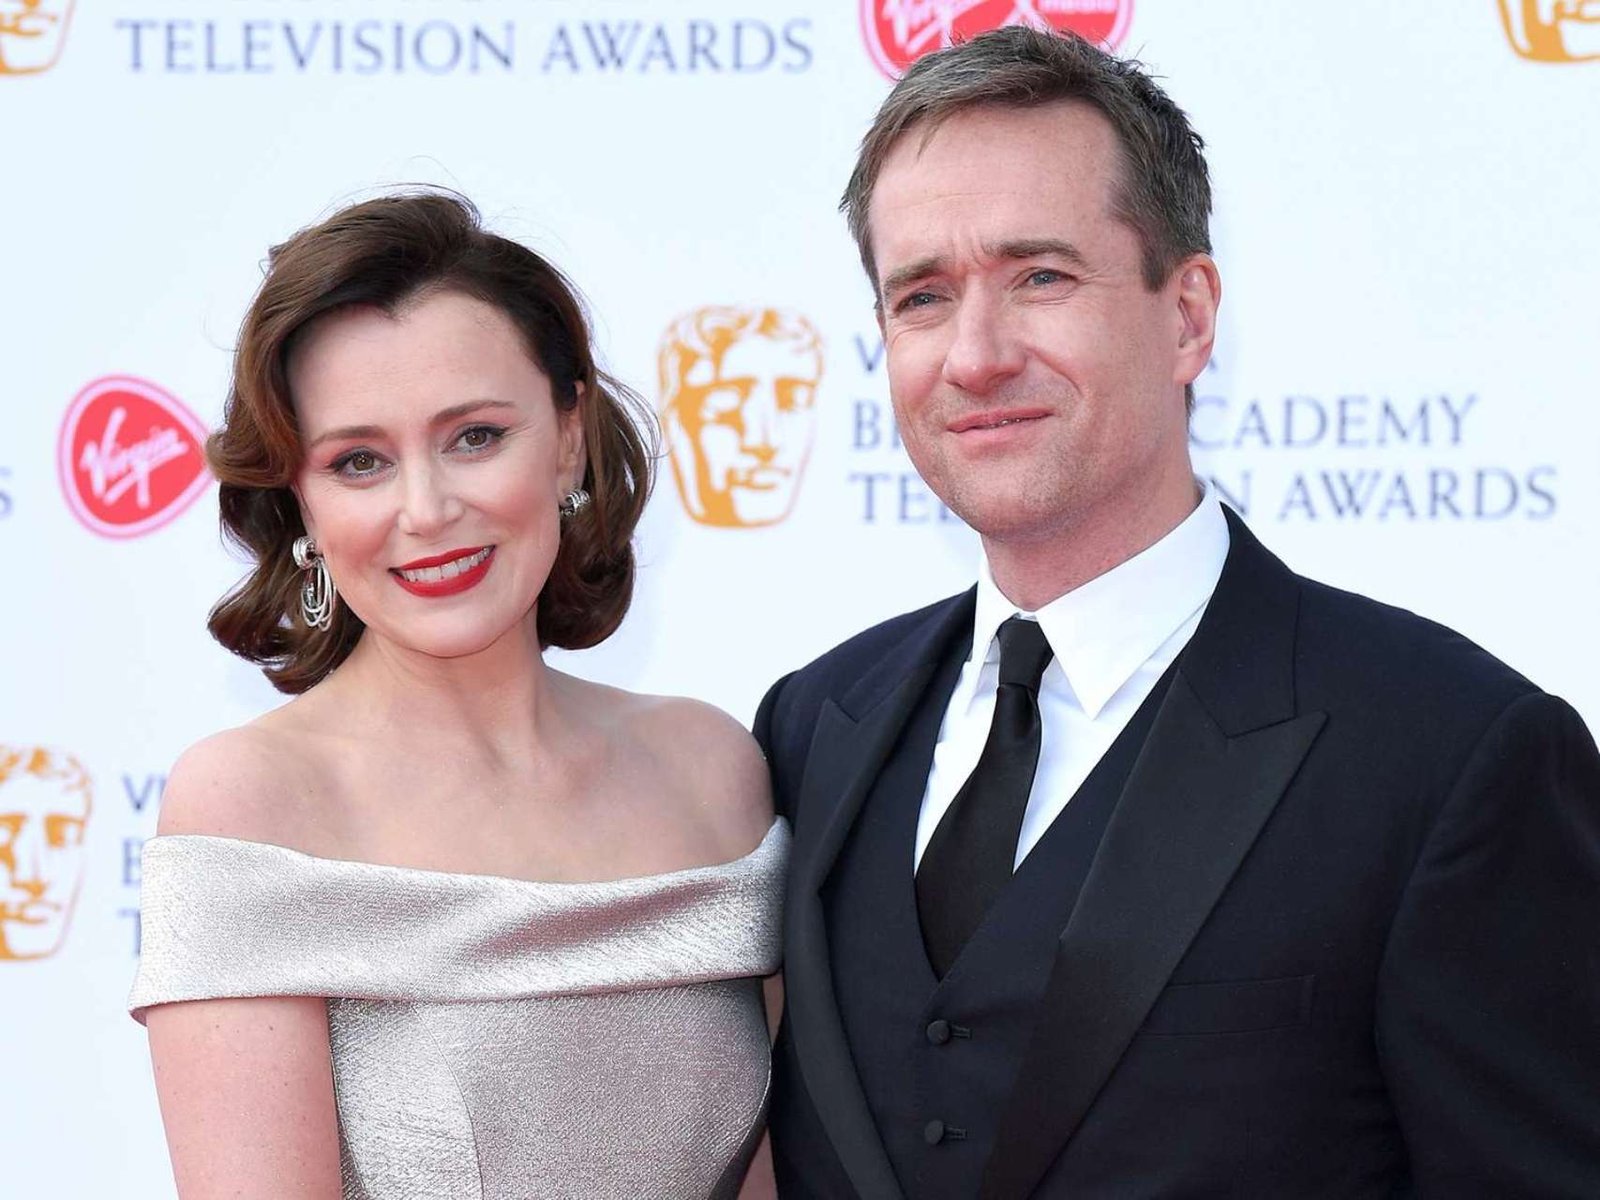 Matthew Macfadyen’s Journey from Mr. Darcy to Succession and Lasting Love with Keeley Hawes